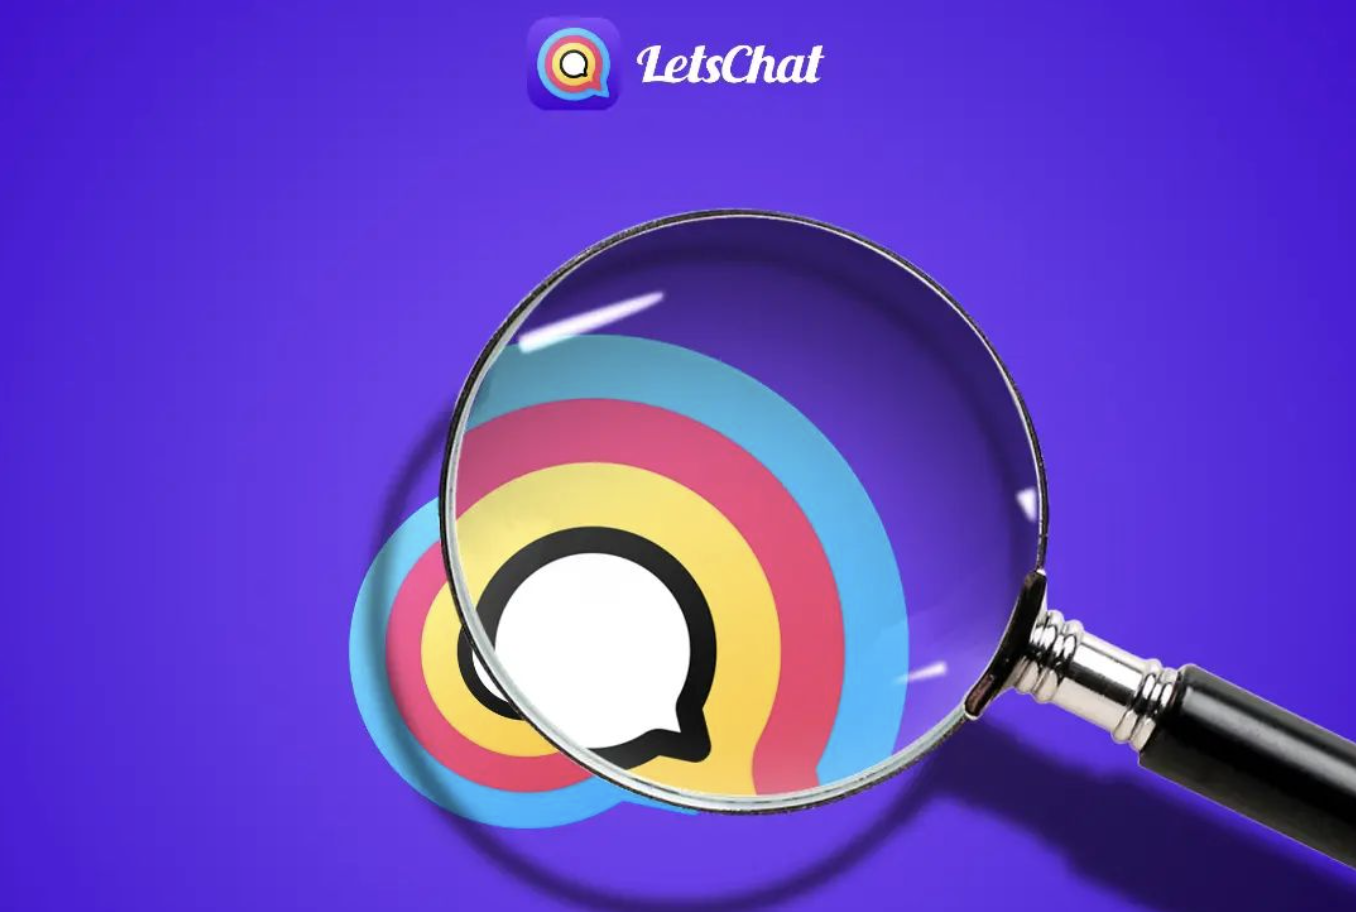 Poster of LetsChat with magnifying glass